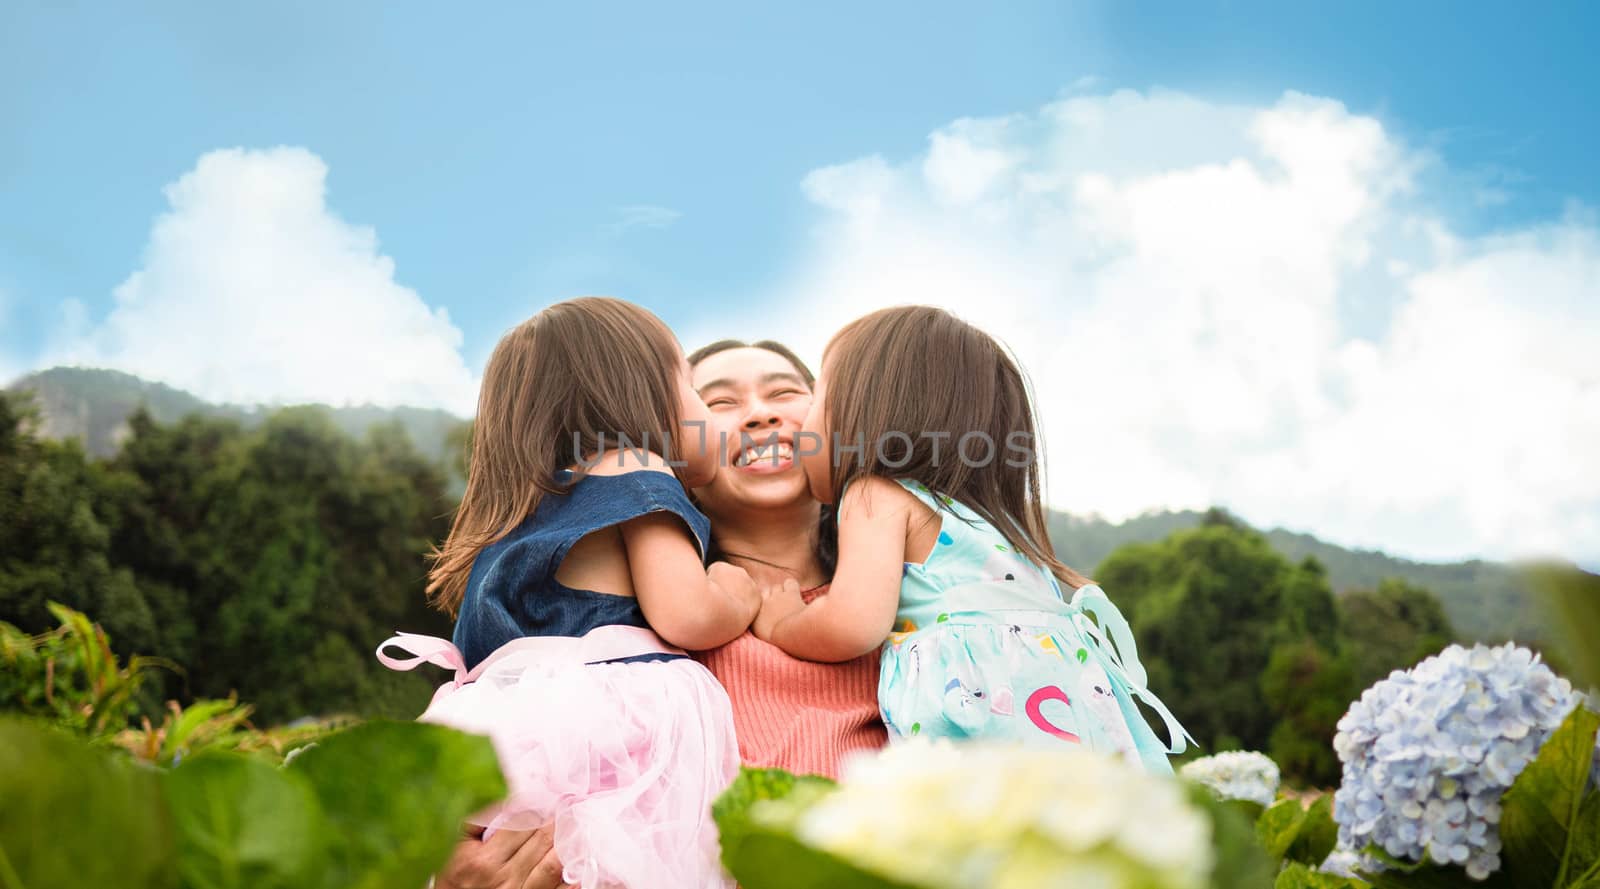 Happy family in hydrangea garden over trees with mountains background under blue sky in summer day.